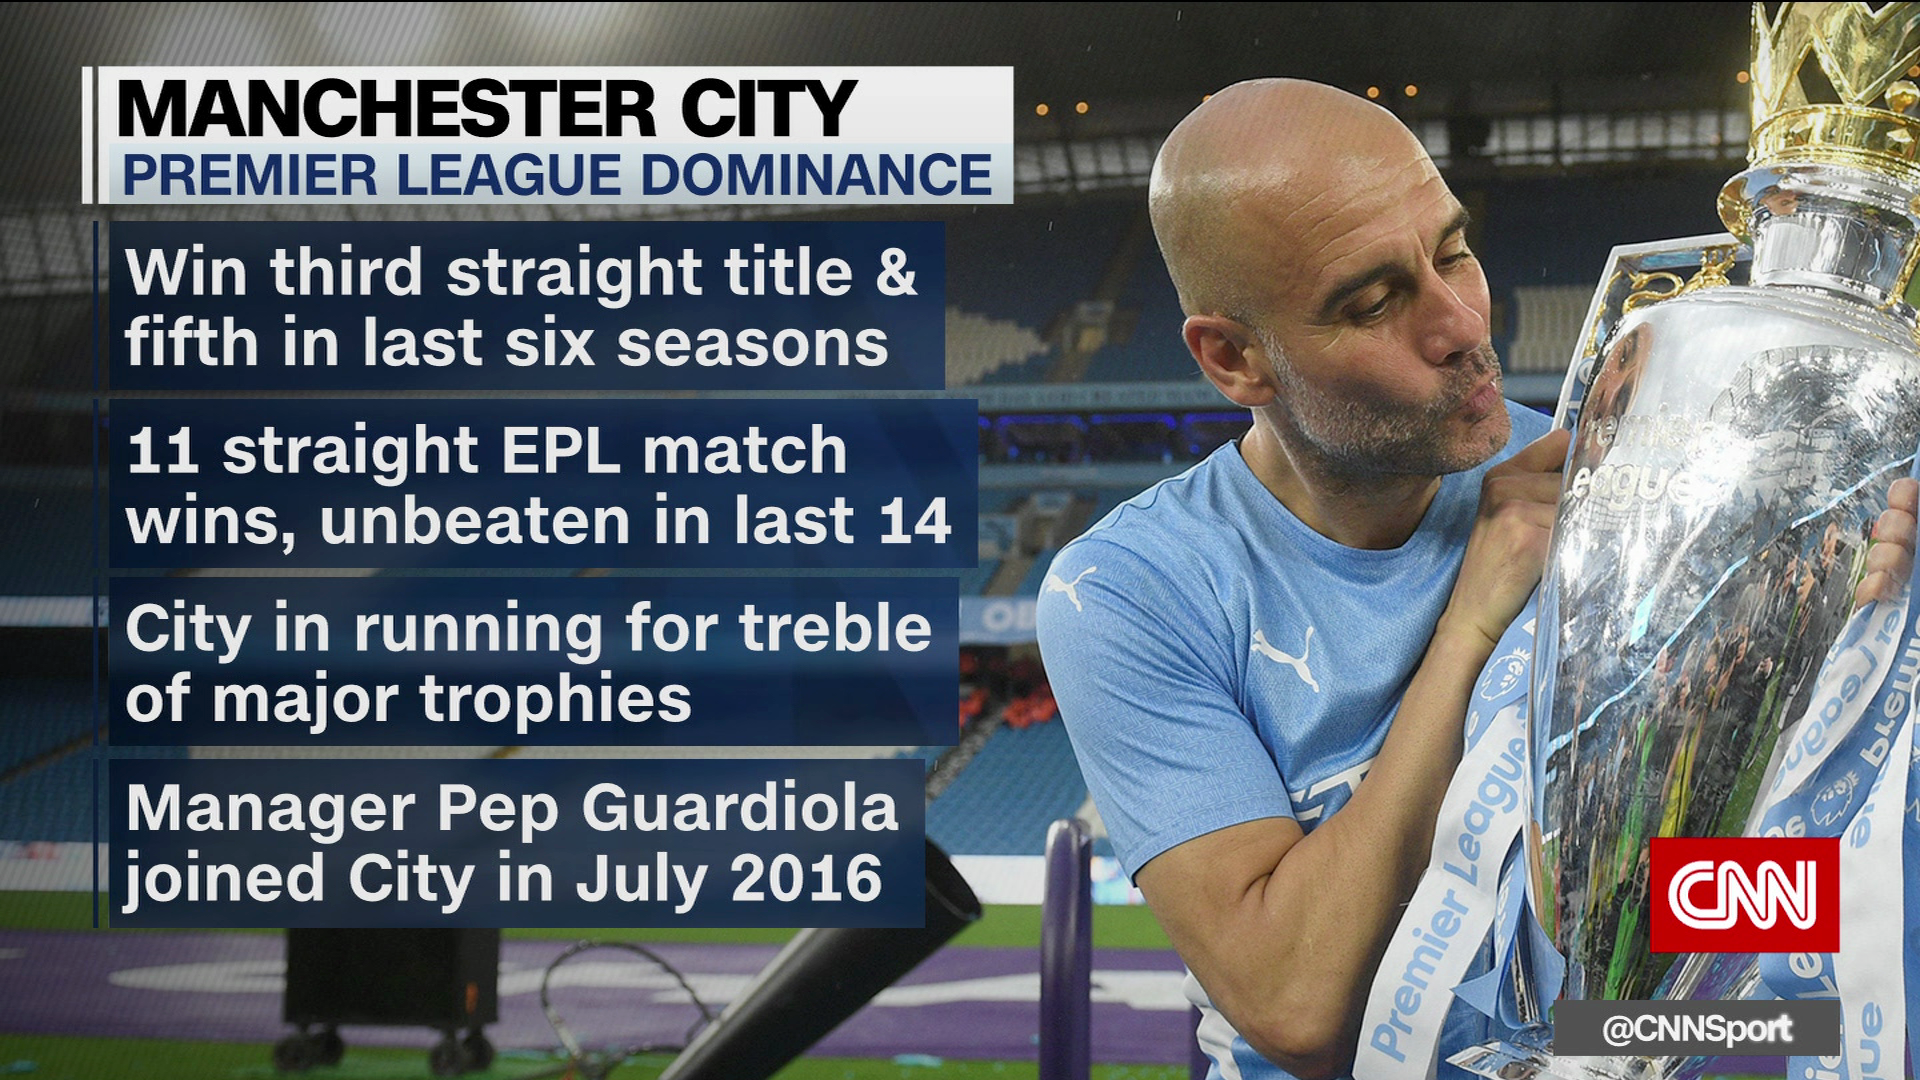 Relentless Manchester City lays claim to being Premier League's greatest  team with stunning era of dominance